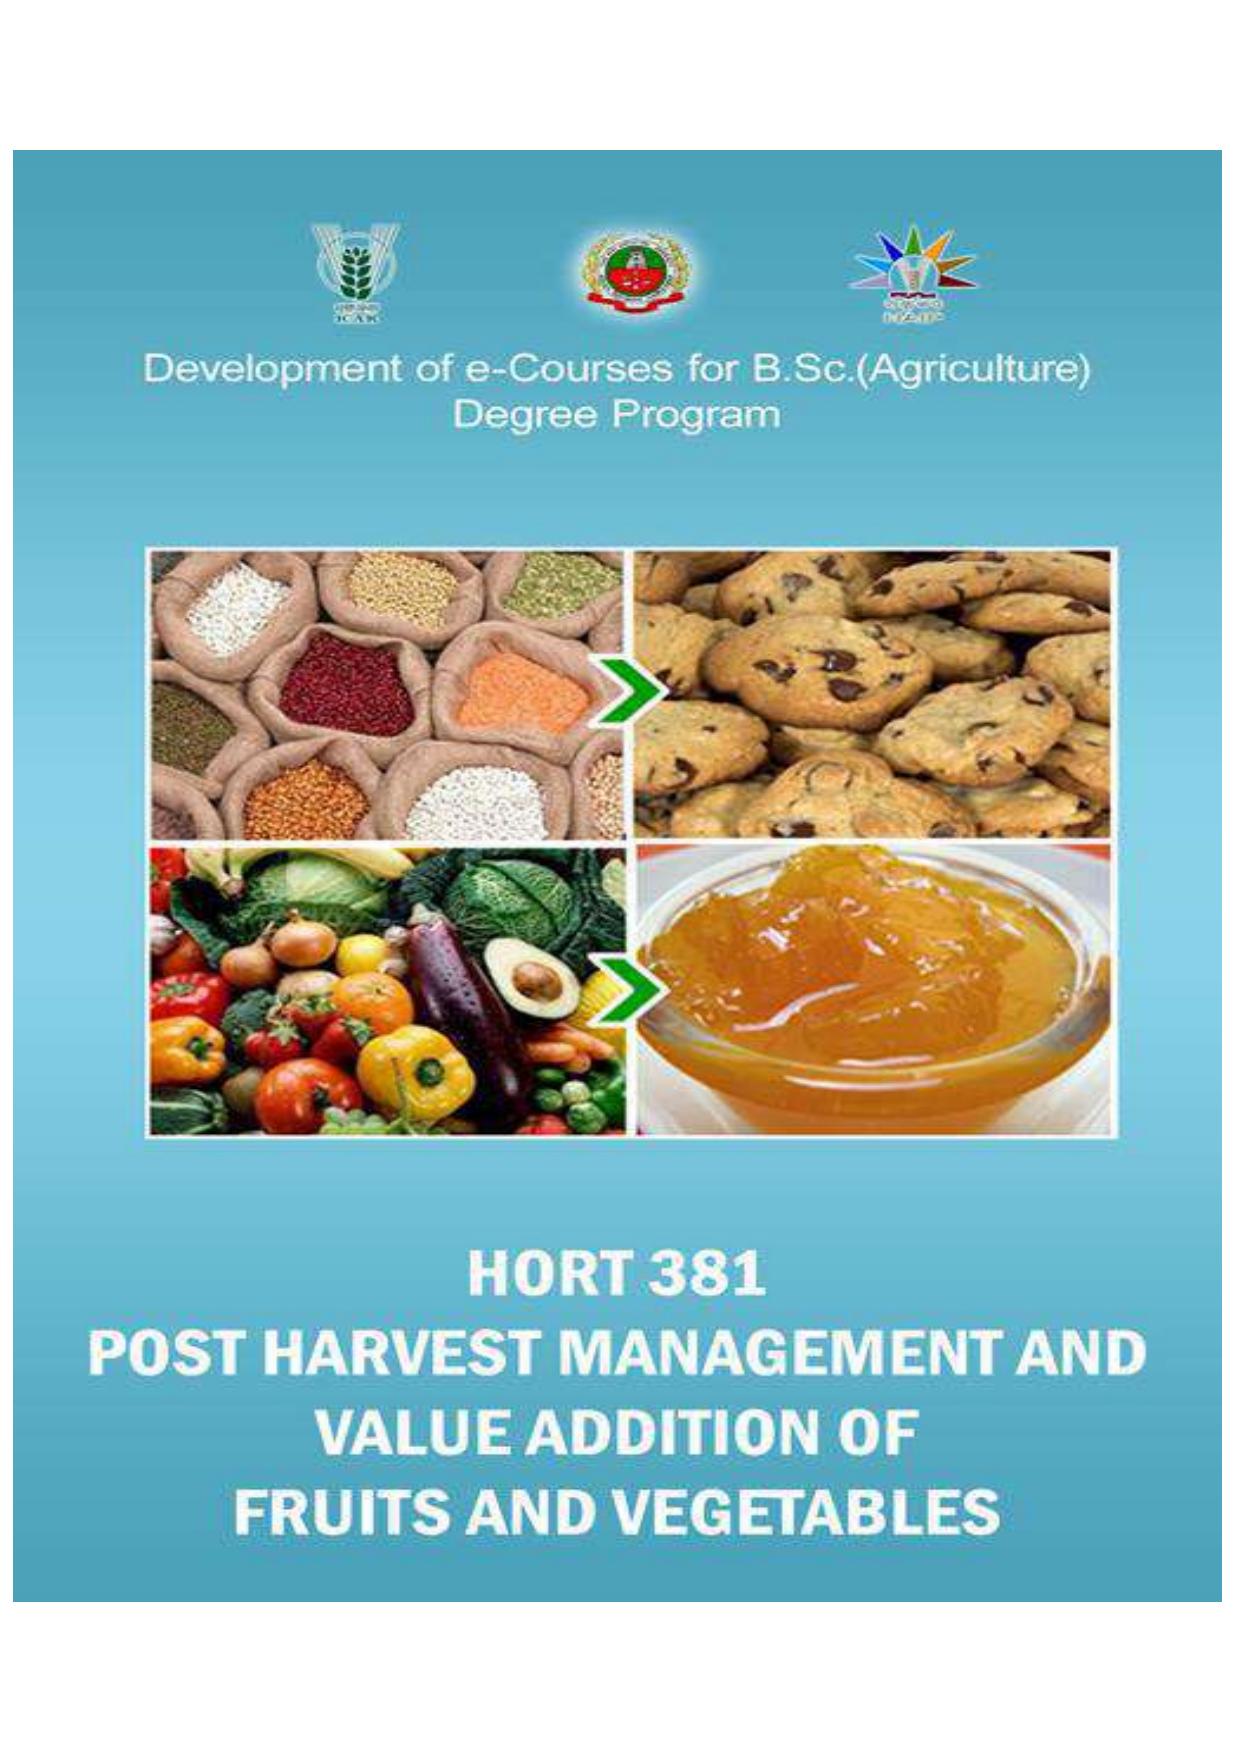 POST HARVEST MANAGEMENT AND VALUE ADDITION OF FRUITS AND VEGETABLES